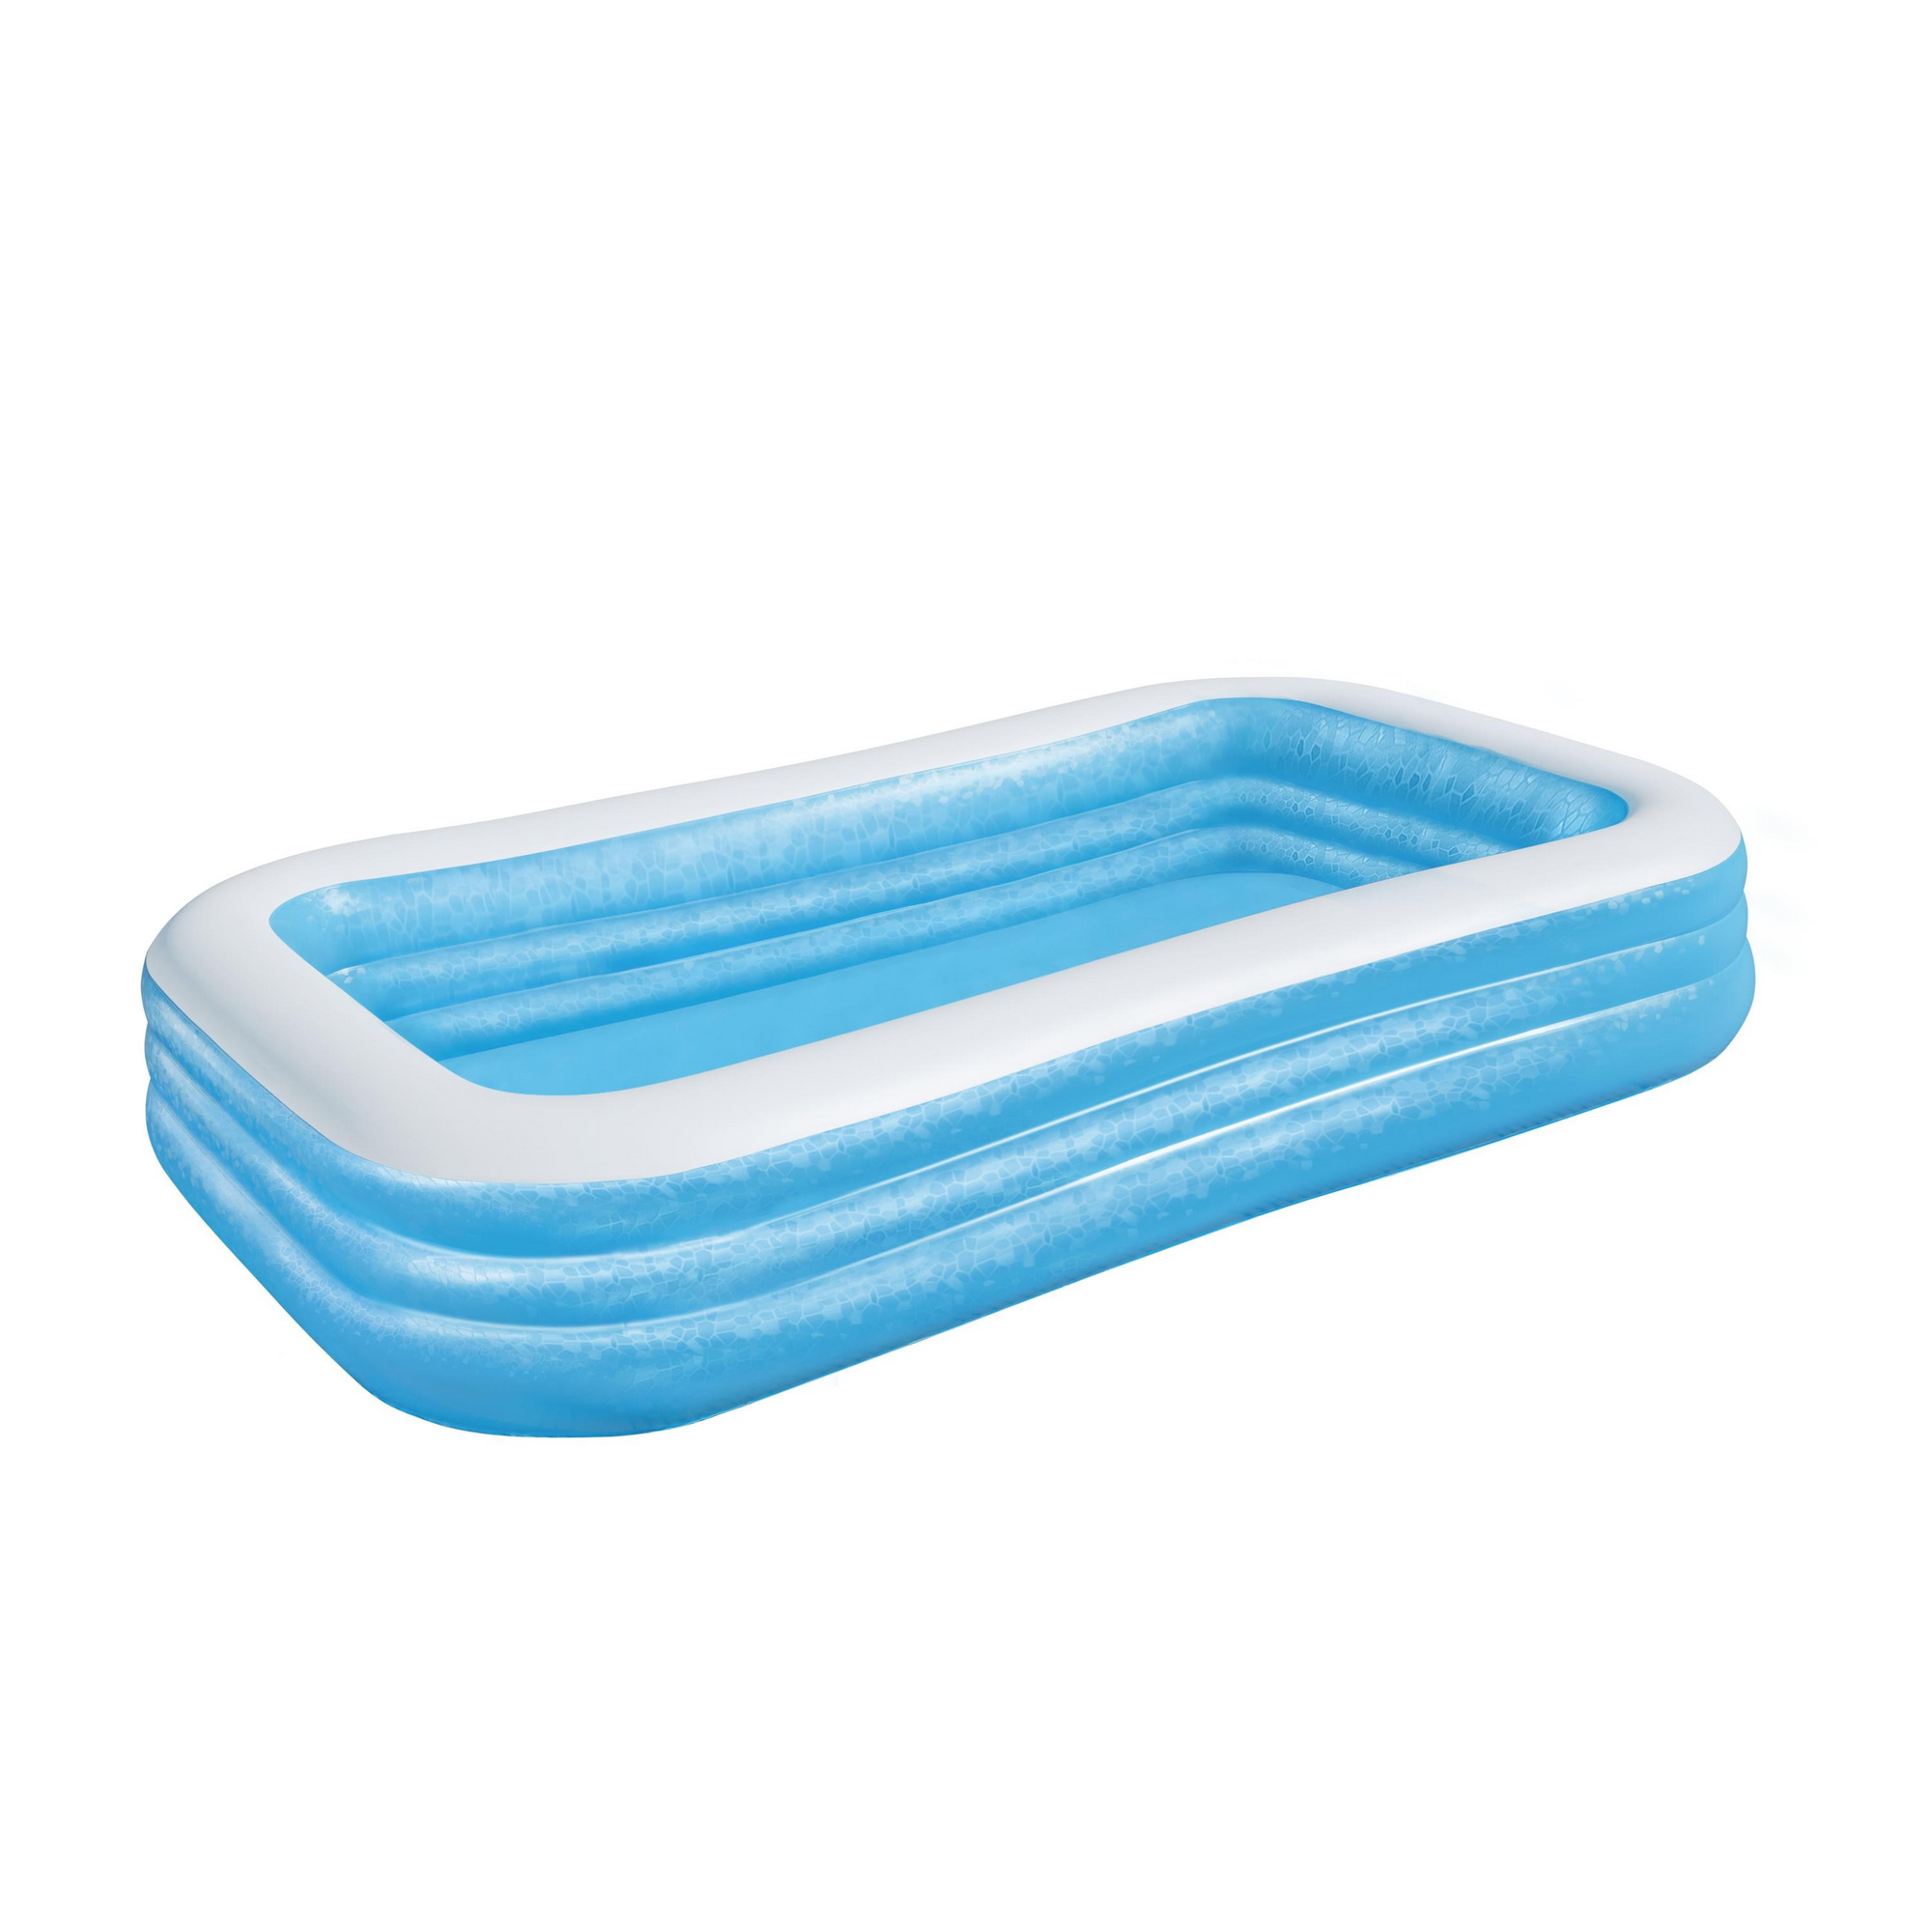 Planschbecken 'Family Pool Deluxe' blau 305 x 183 x 56 cm + product picture